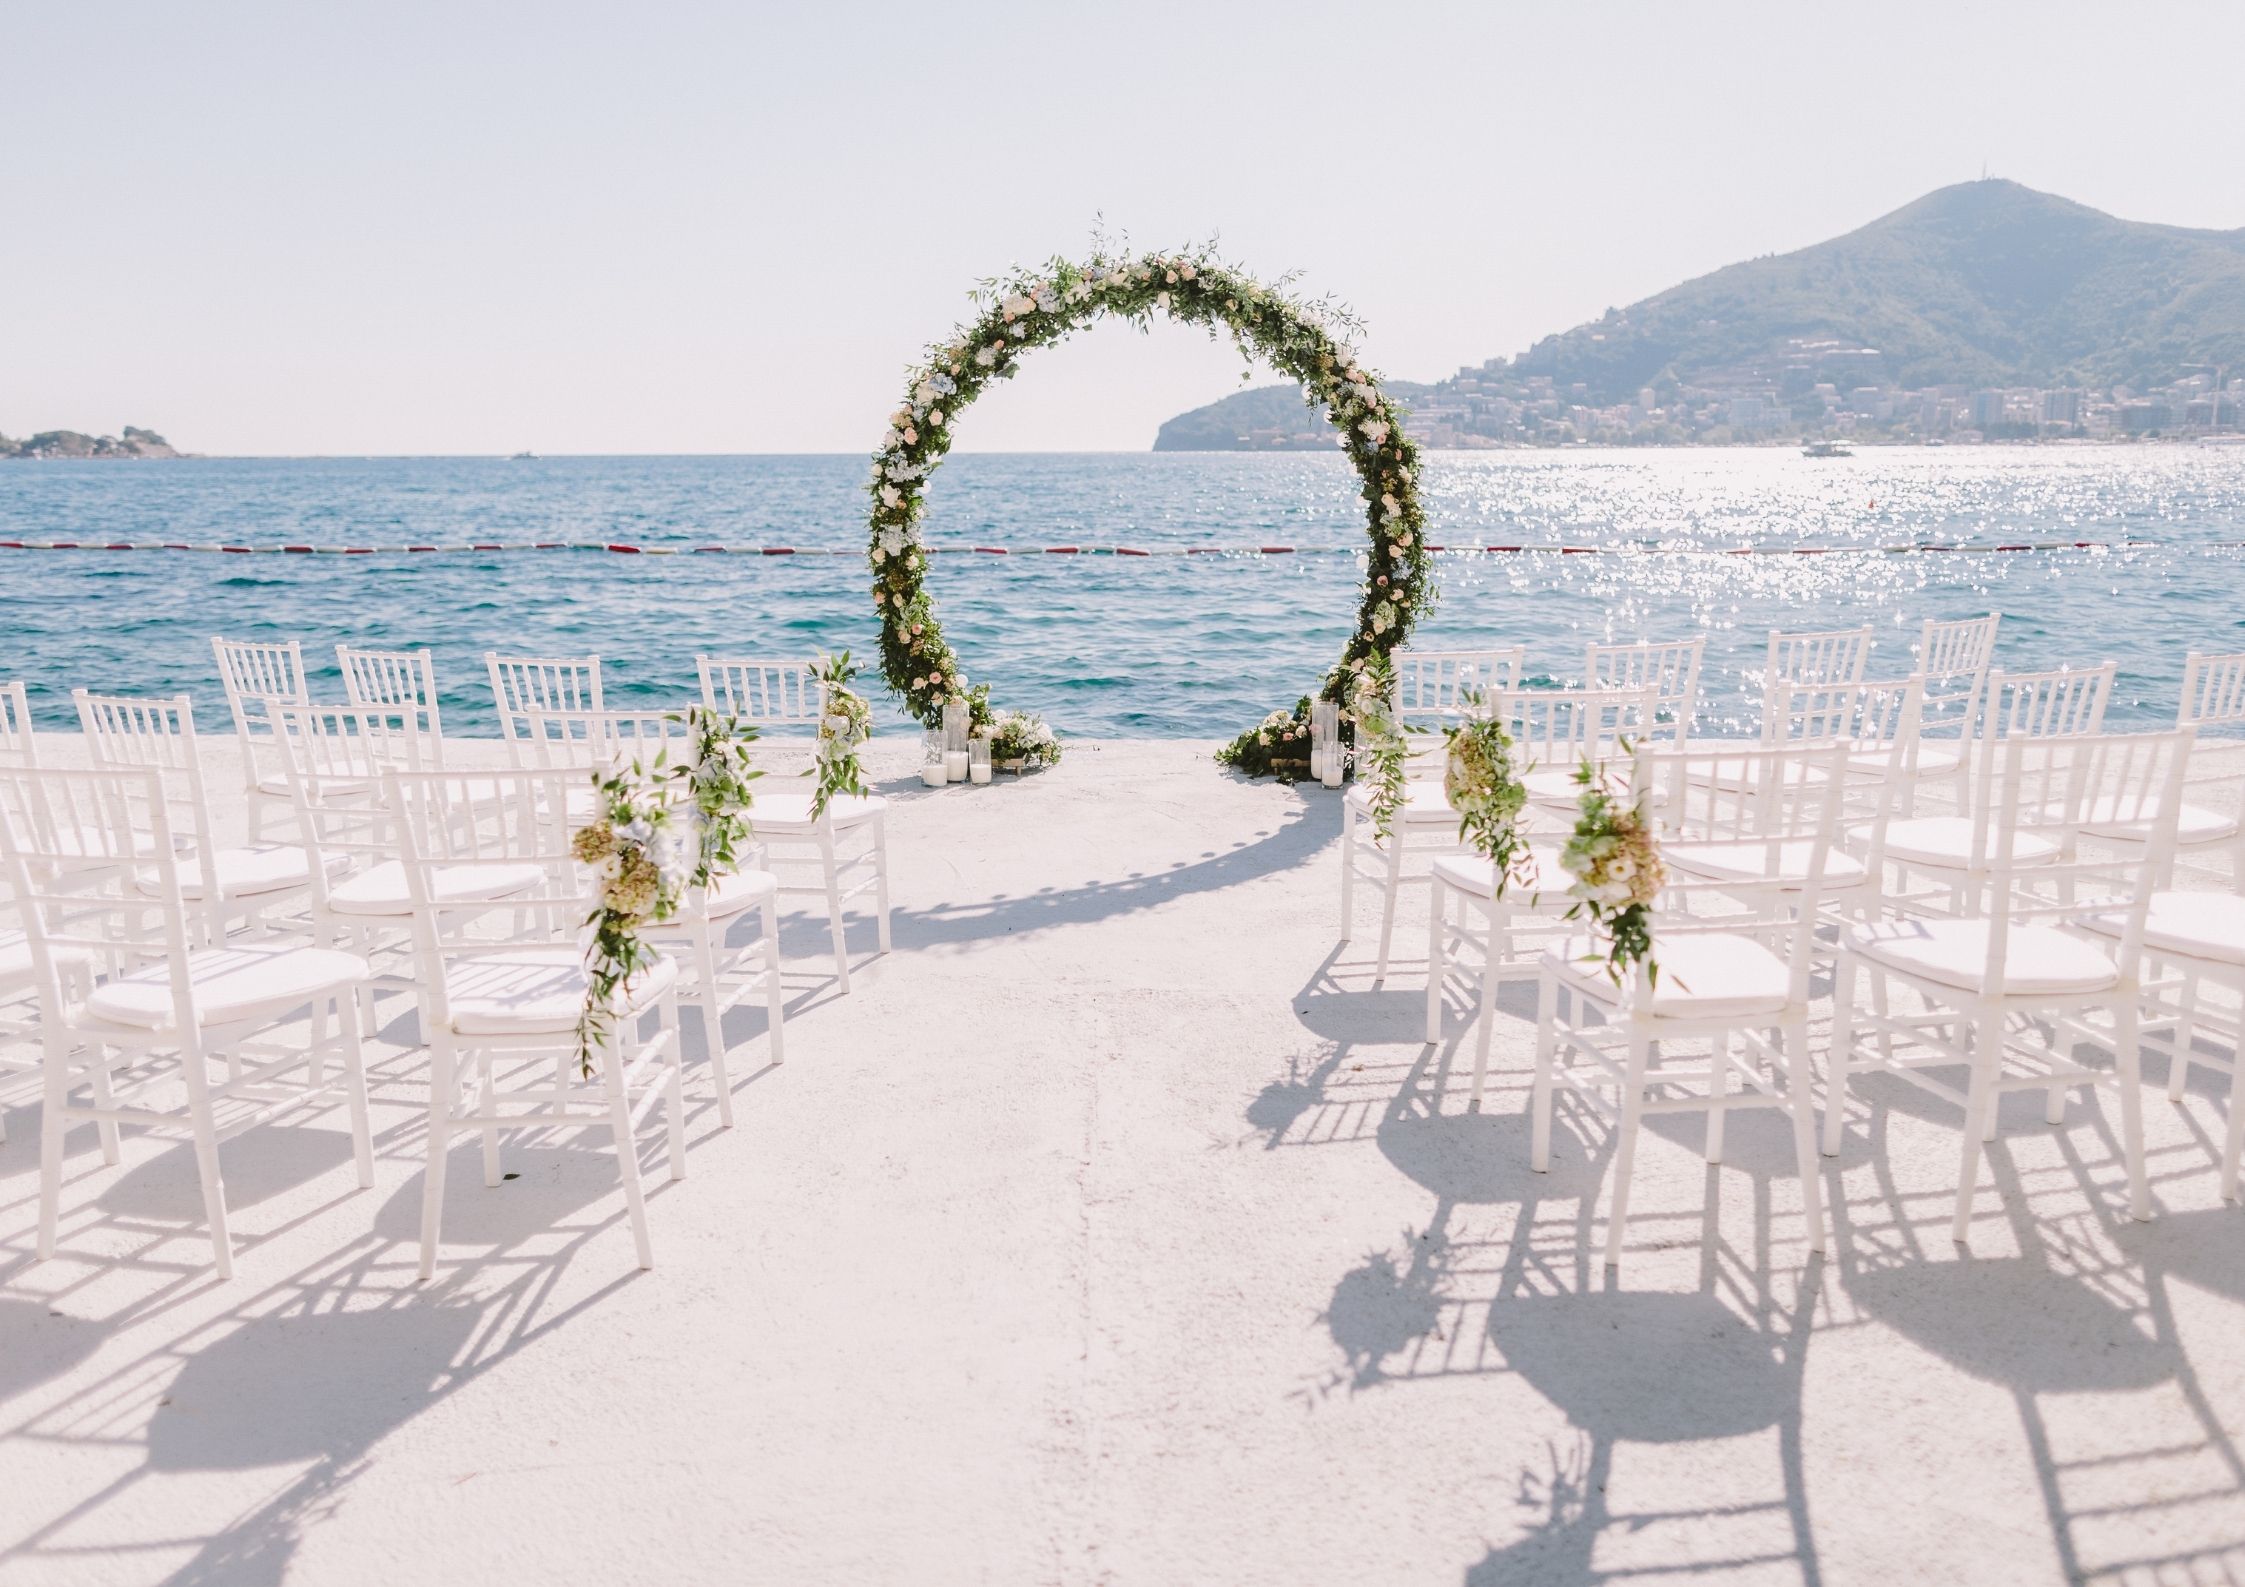 Saying 'I do' in a dreamy overseas location is incredibly romantic, but there's a lot more involved in planning a destination wedding than simply booking flights and choosing a nice hotel. 